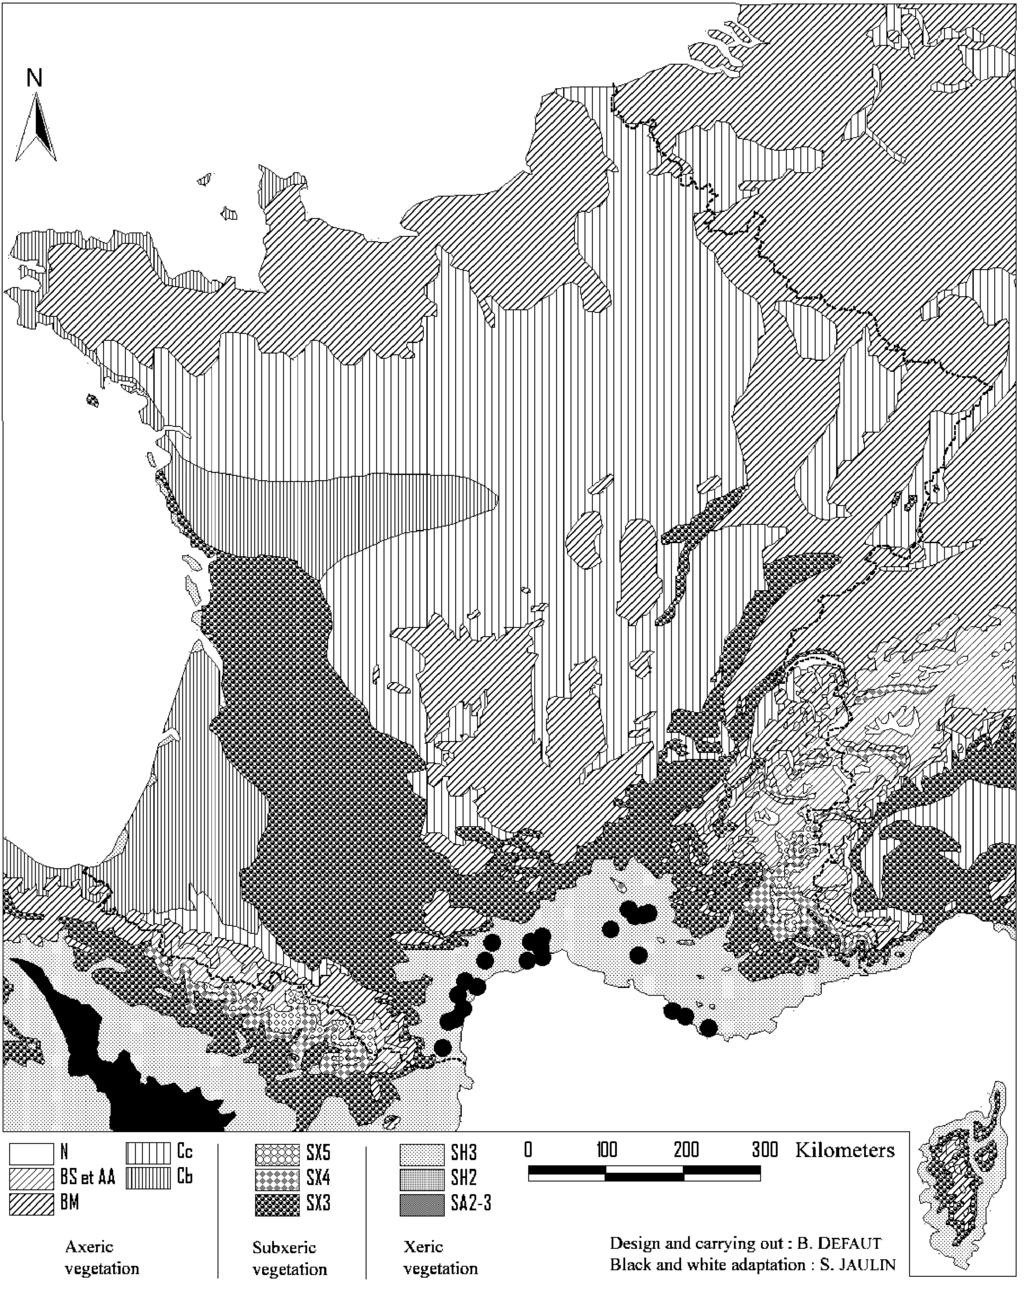 Fig. 4. Distribution of T. garricola in France. Vegetation classes as in Fig. 2. as they are associated with more than two habitat categories. T. c. fairmairei, T. garricola and T.